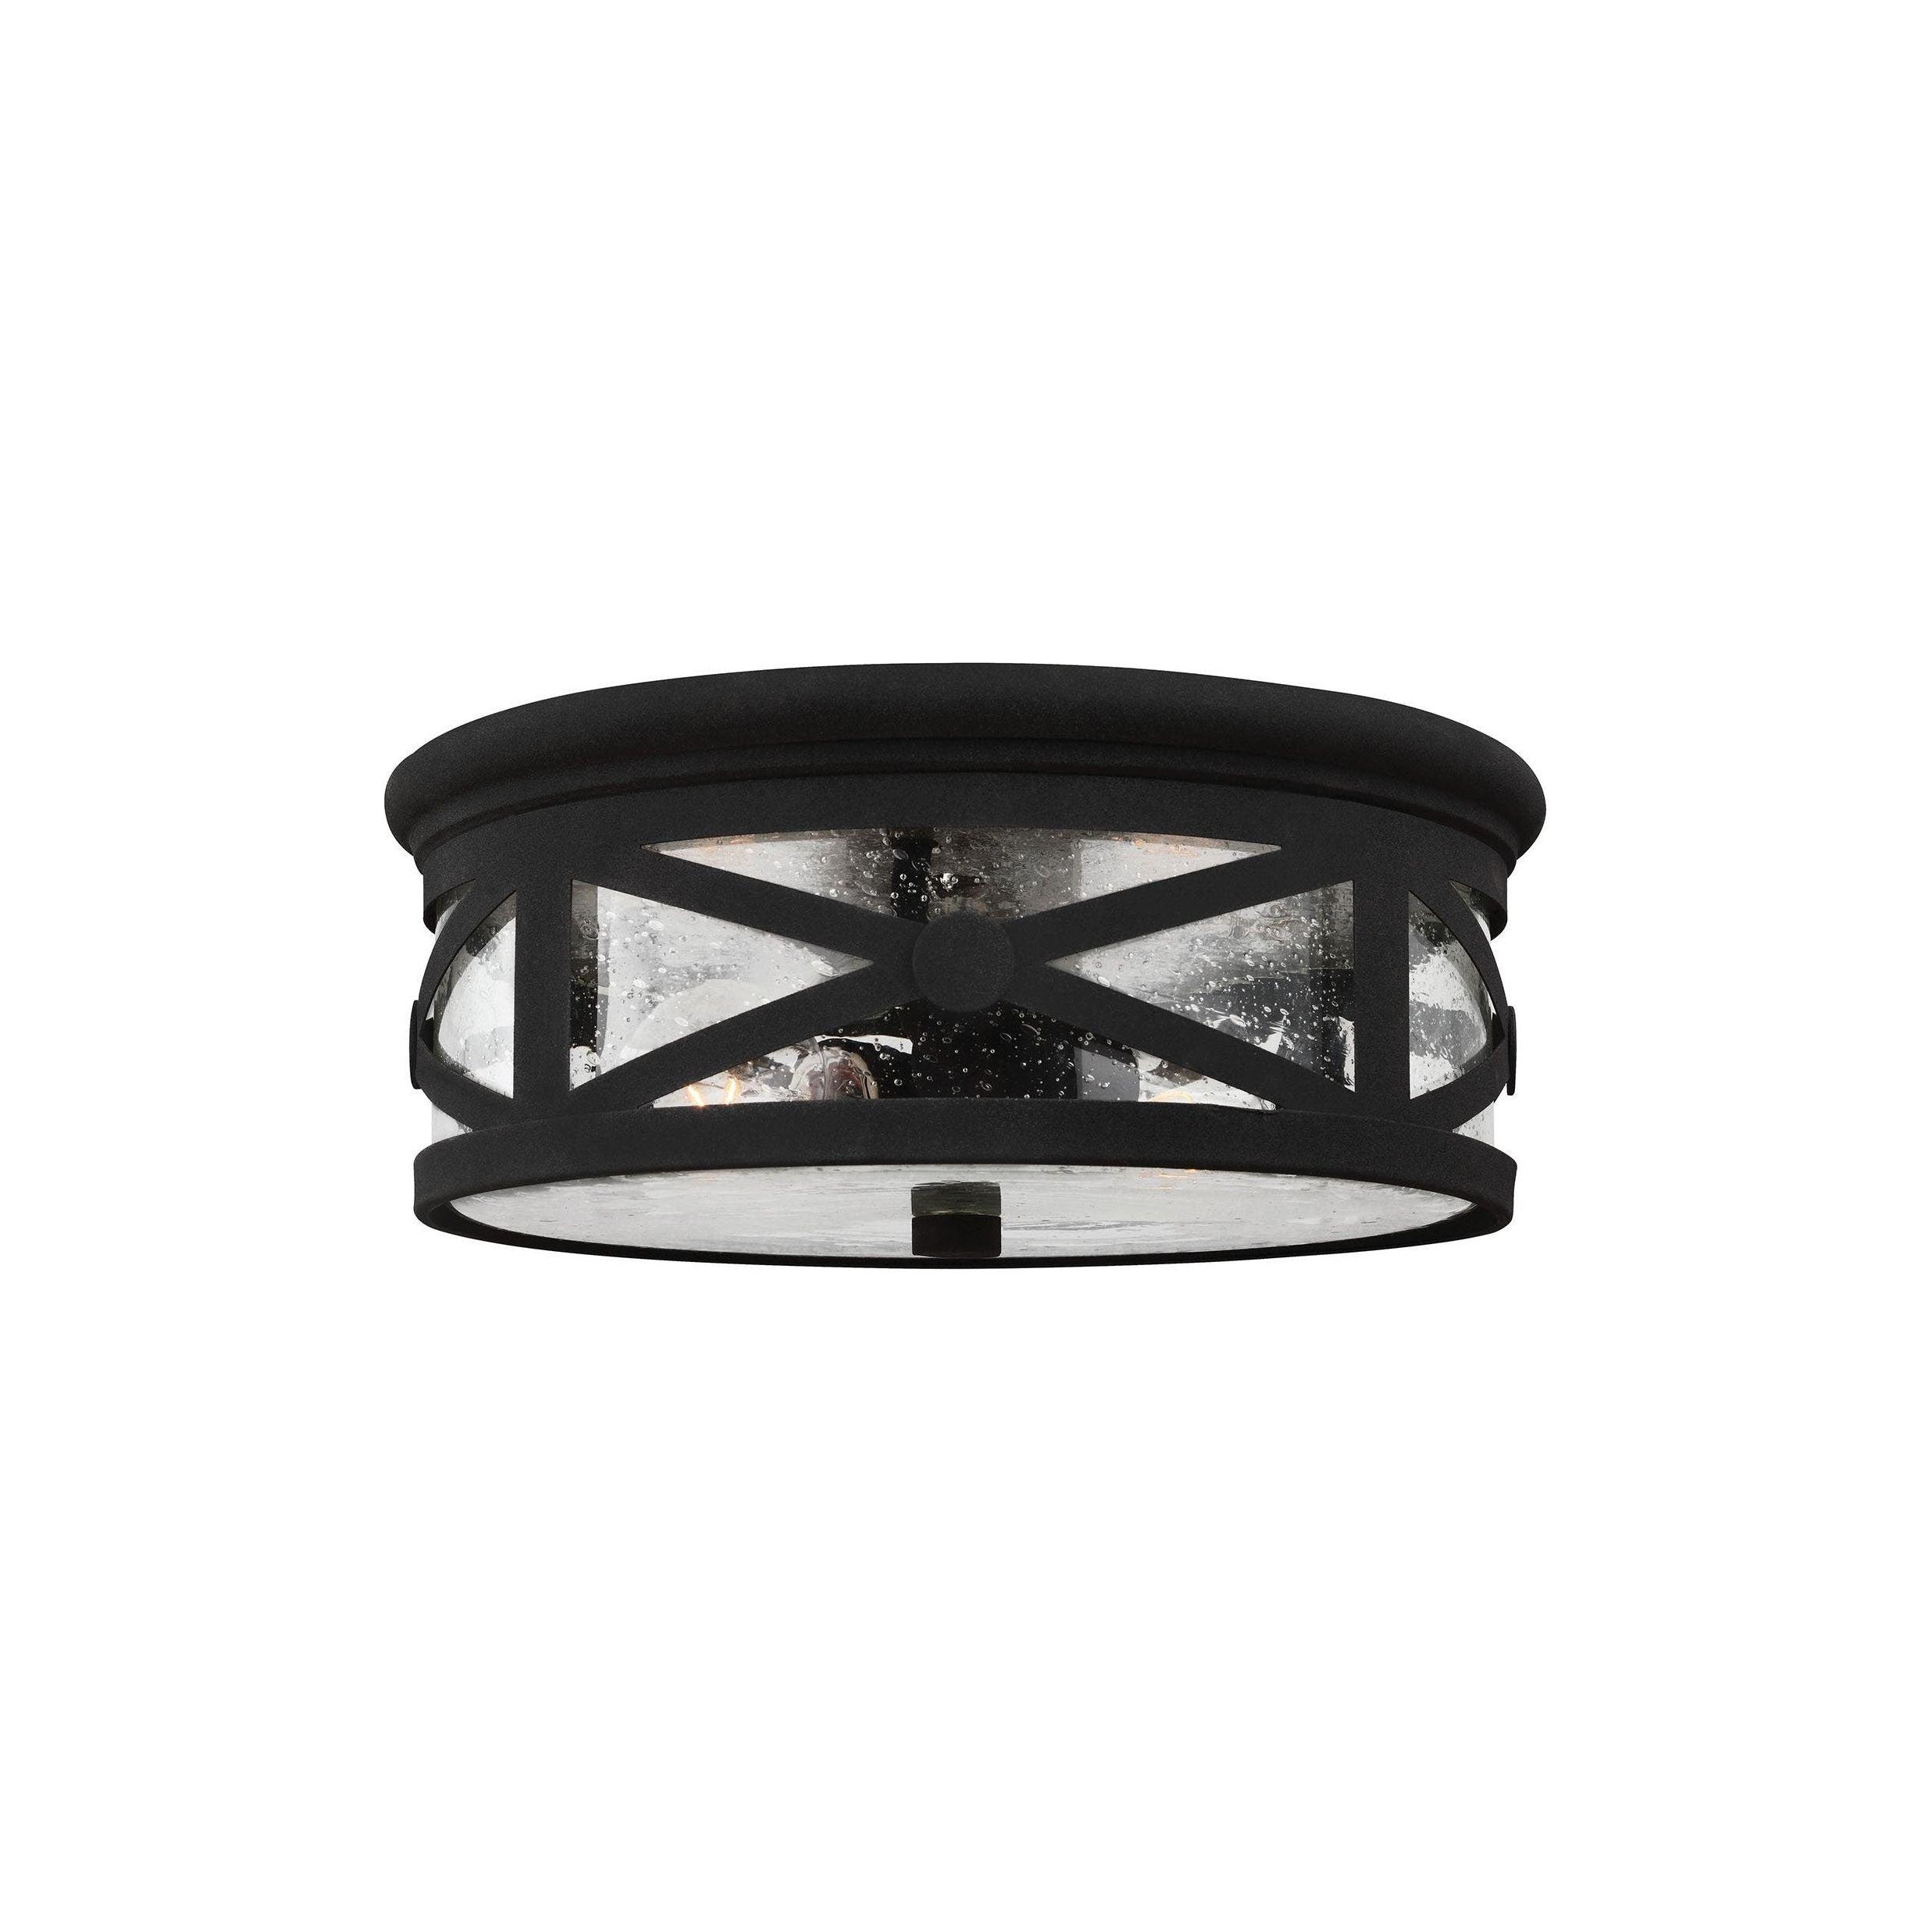 Generation Lighting - Lakeview Outdoor Ceiling Light - Lights Canada